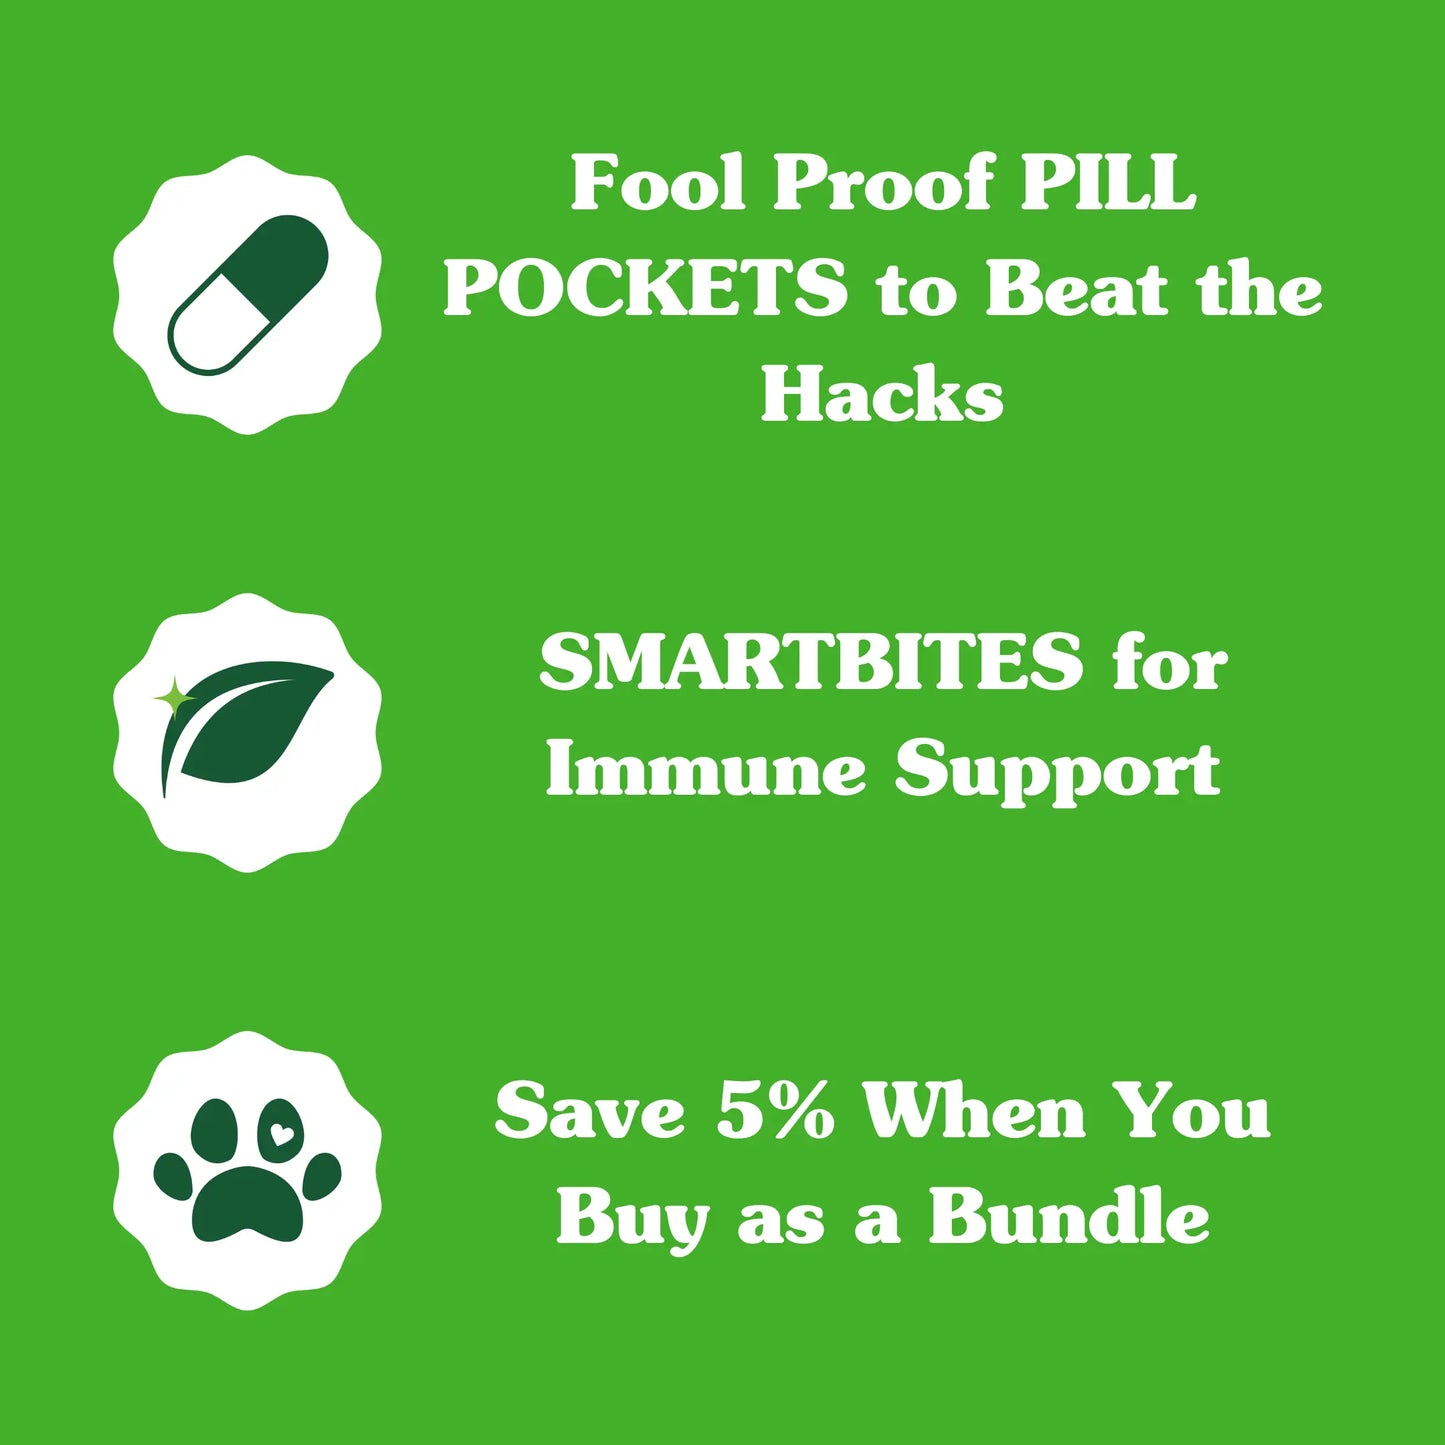 Fool Proof Pill Pockets to beat the hacks, SMARTBITES for Immune Support, Save 5% When you Buy As a Bundle 